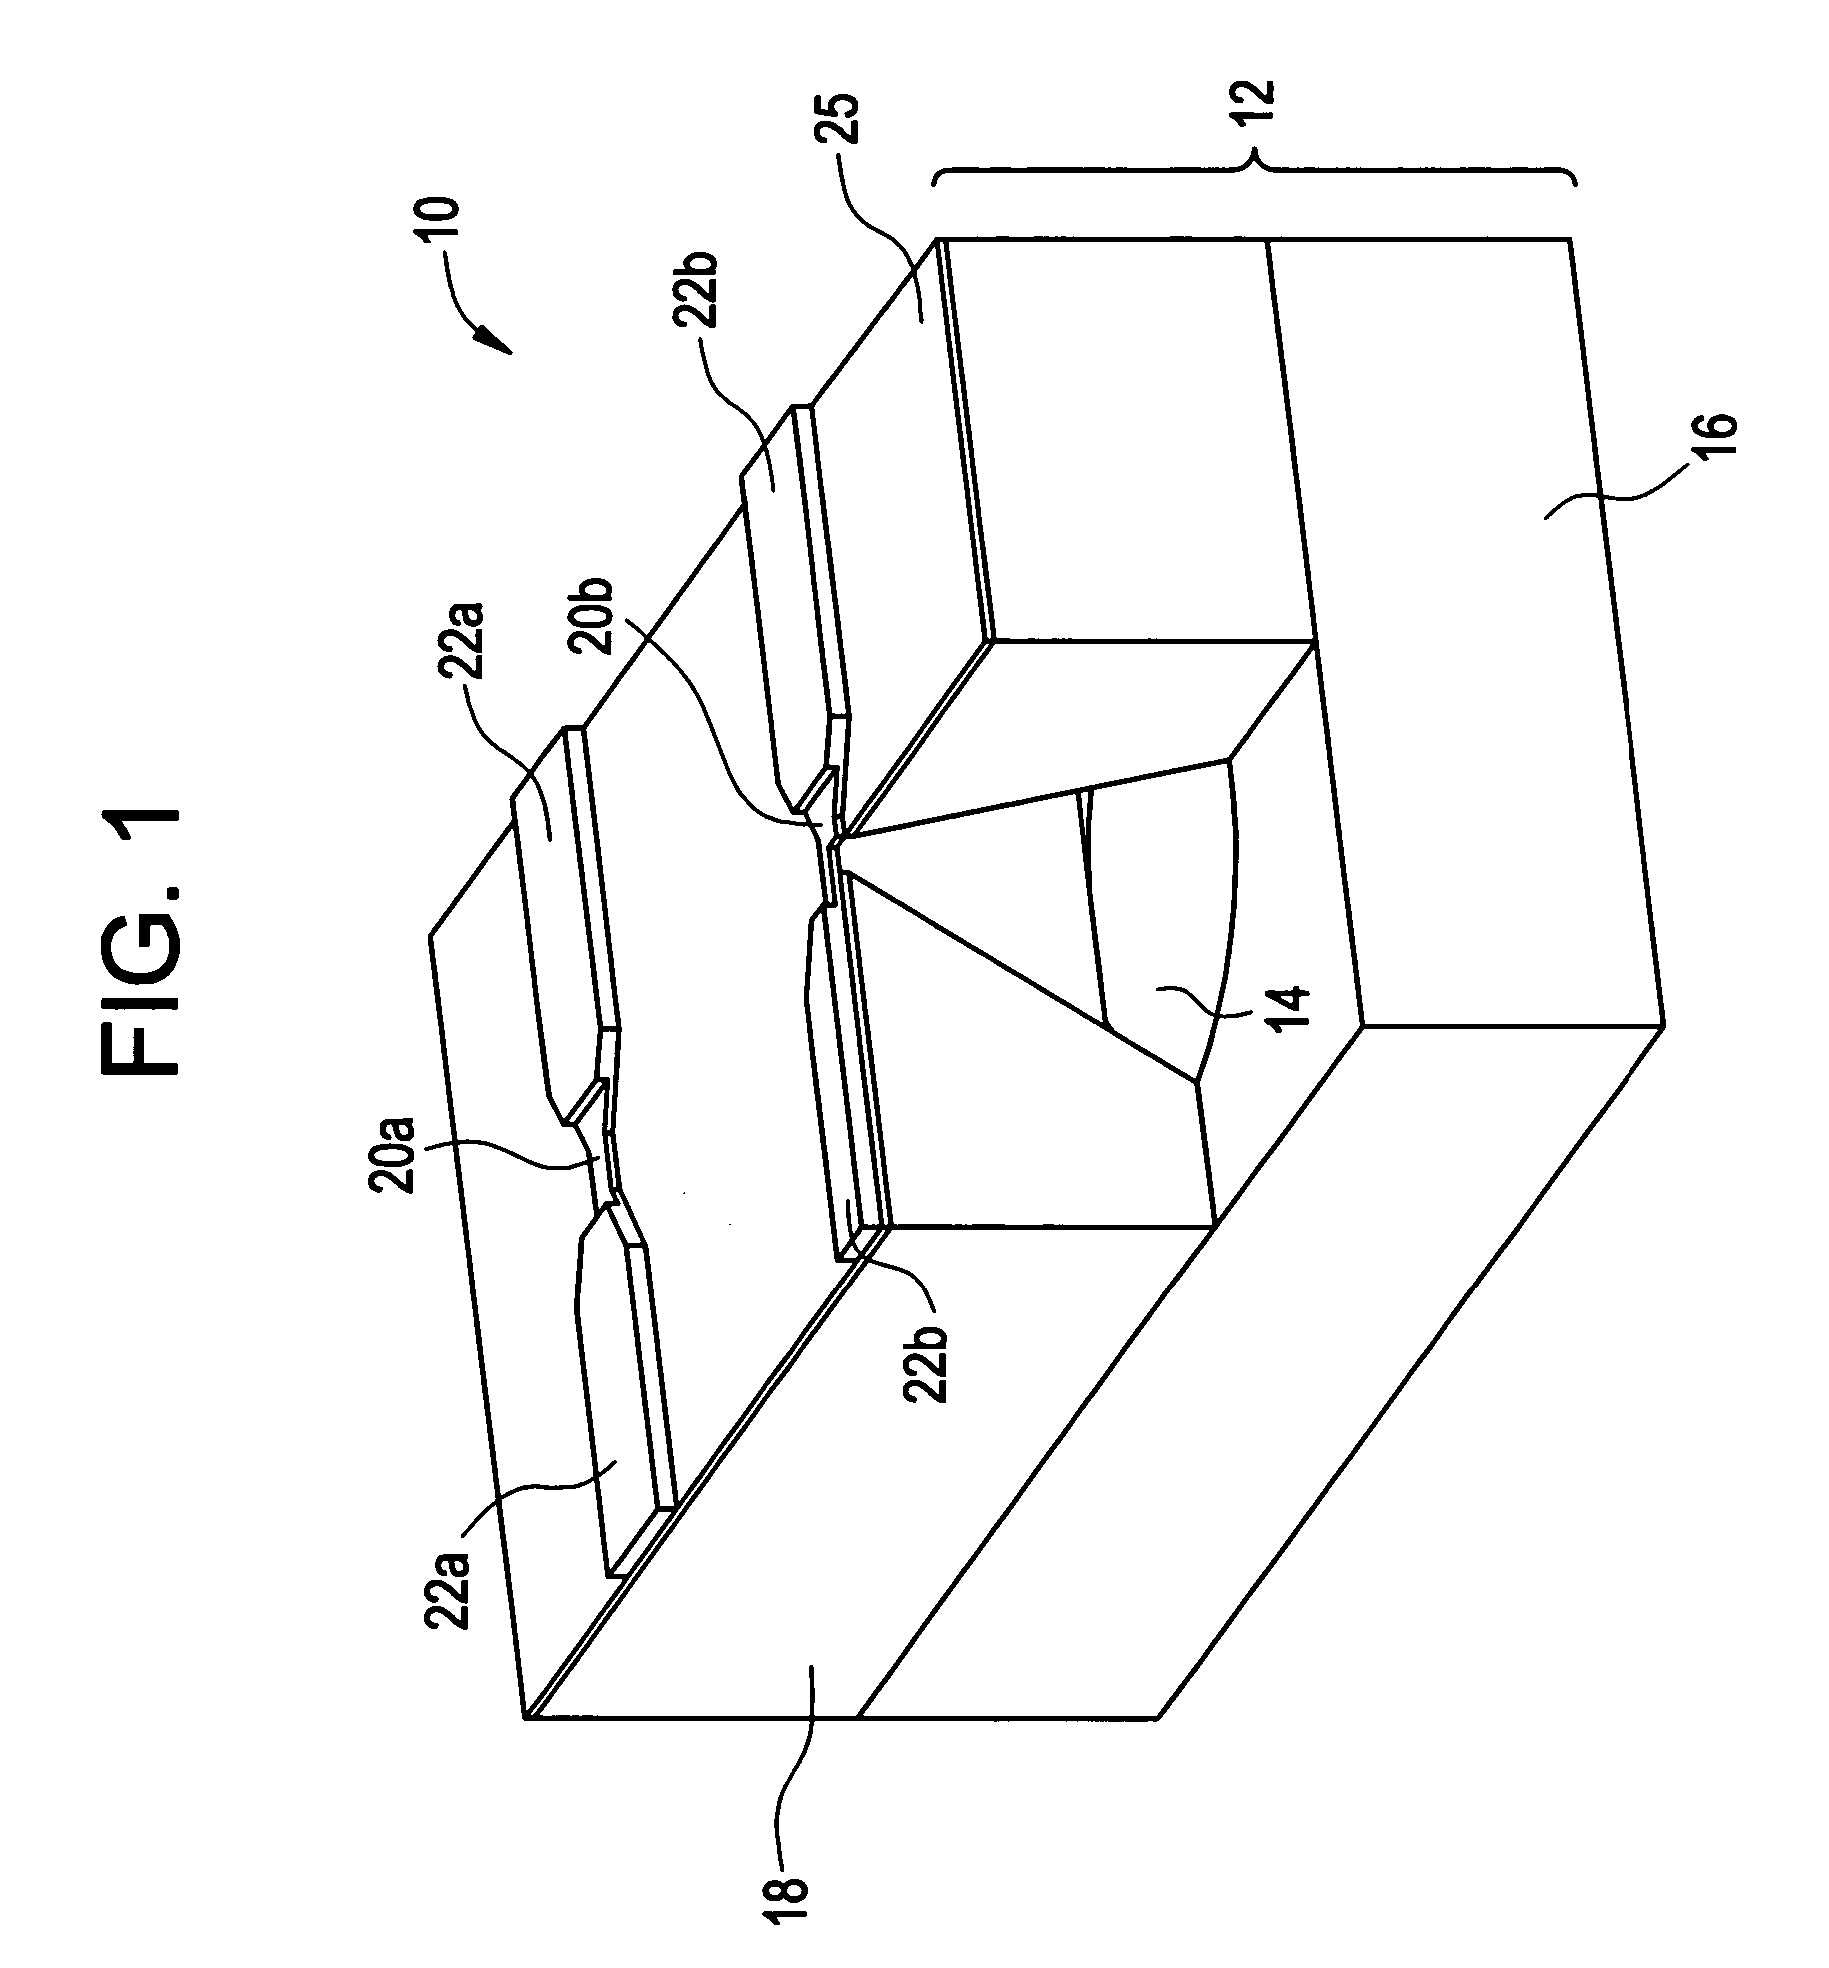 Devices and methods for measuring and enhancing drug or analyte transport to/from medical implant